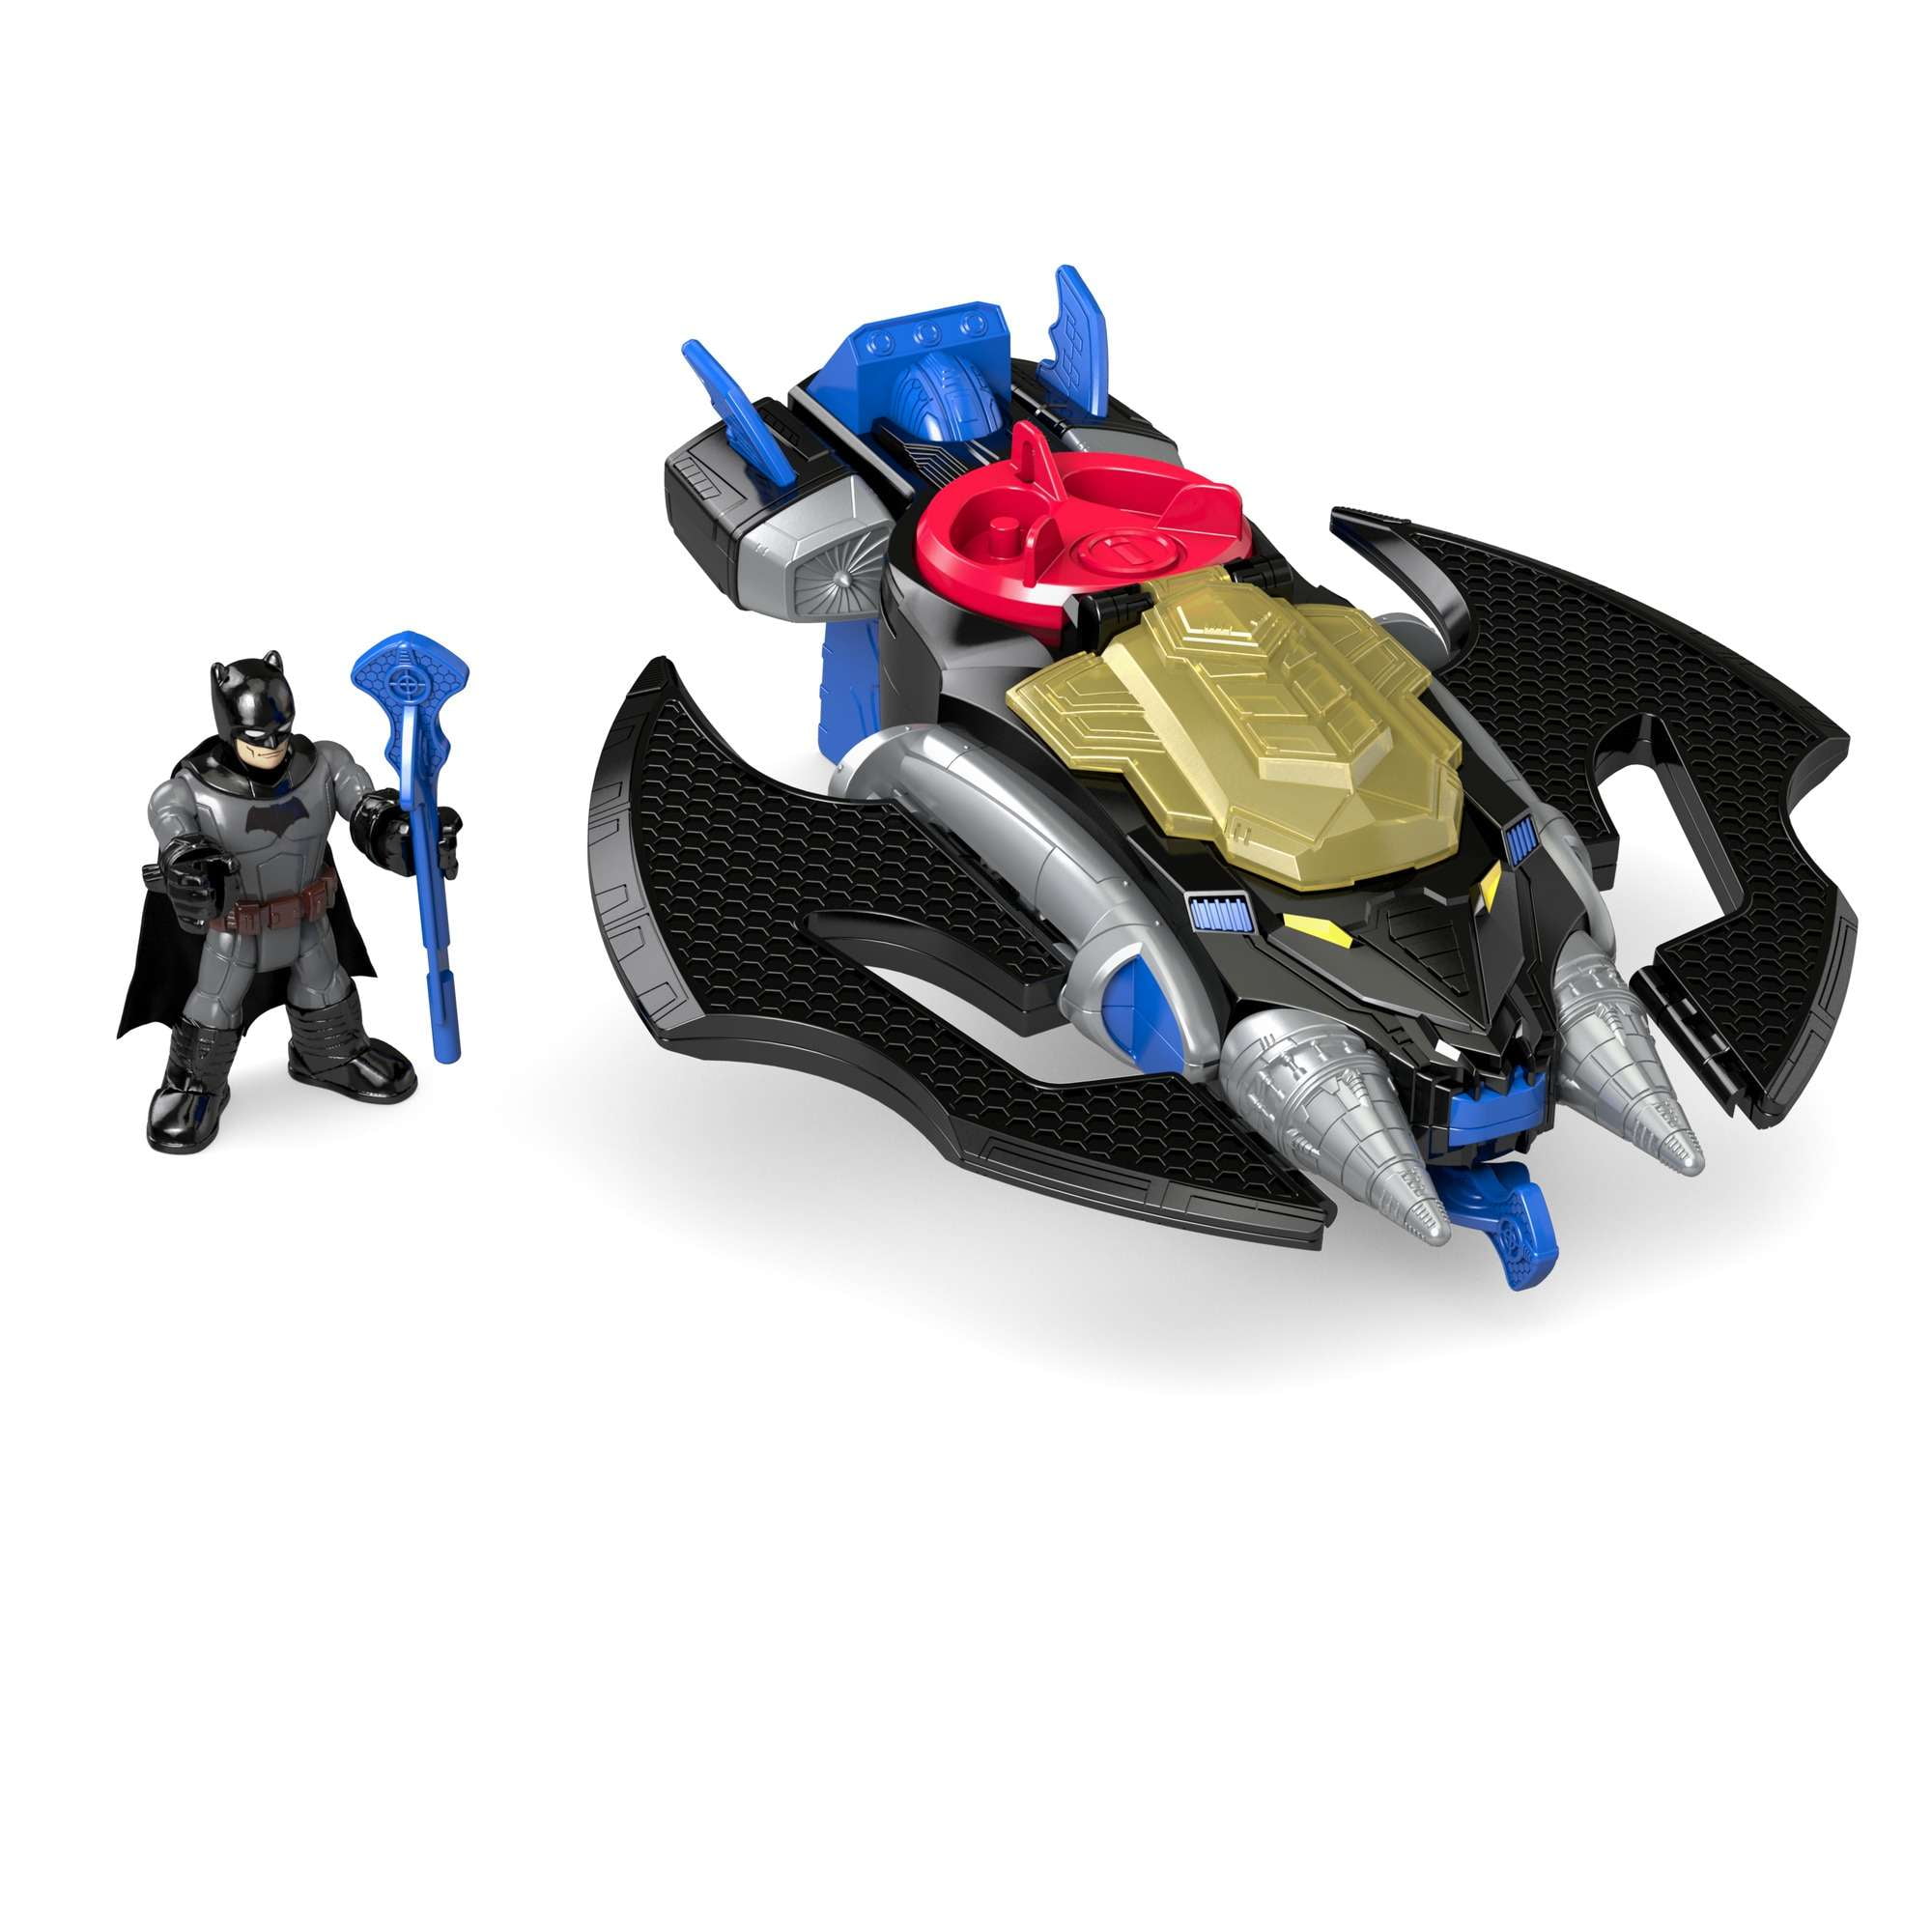 Imaginext Super Friends Batcave Replacement Robin jet pack NEW batwing glider 